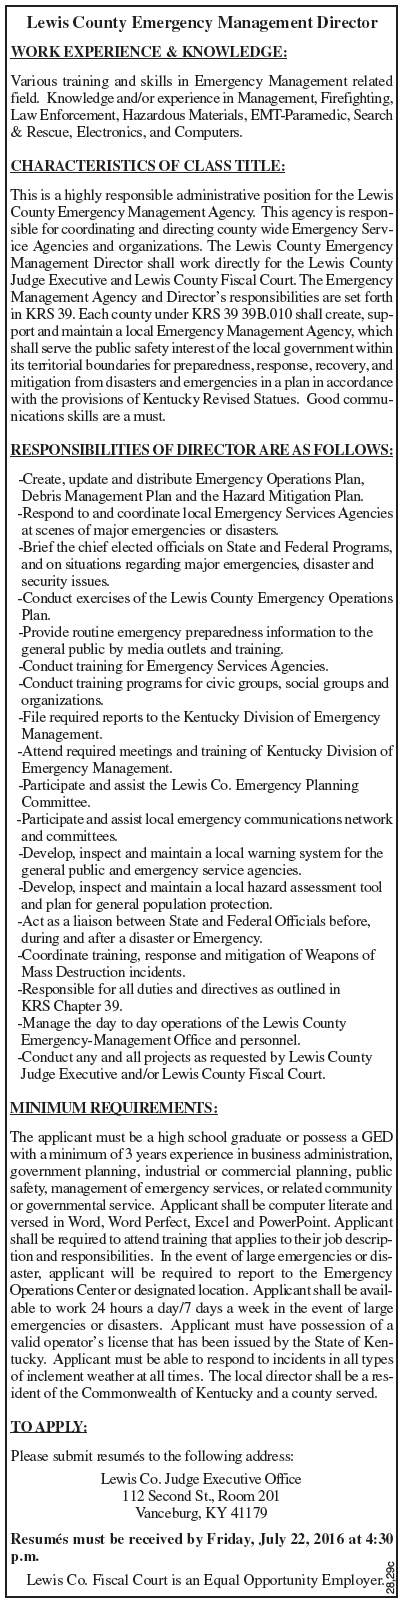 Lewis County Position for Emergency Management Director